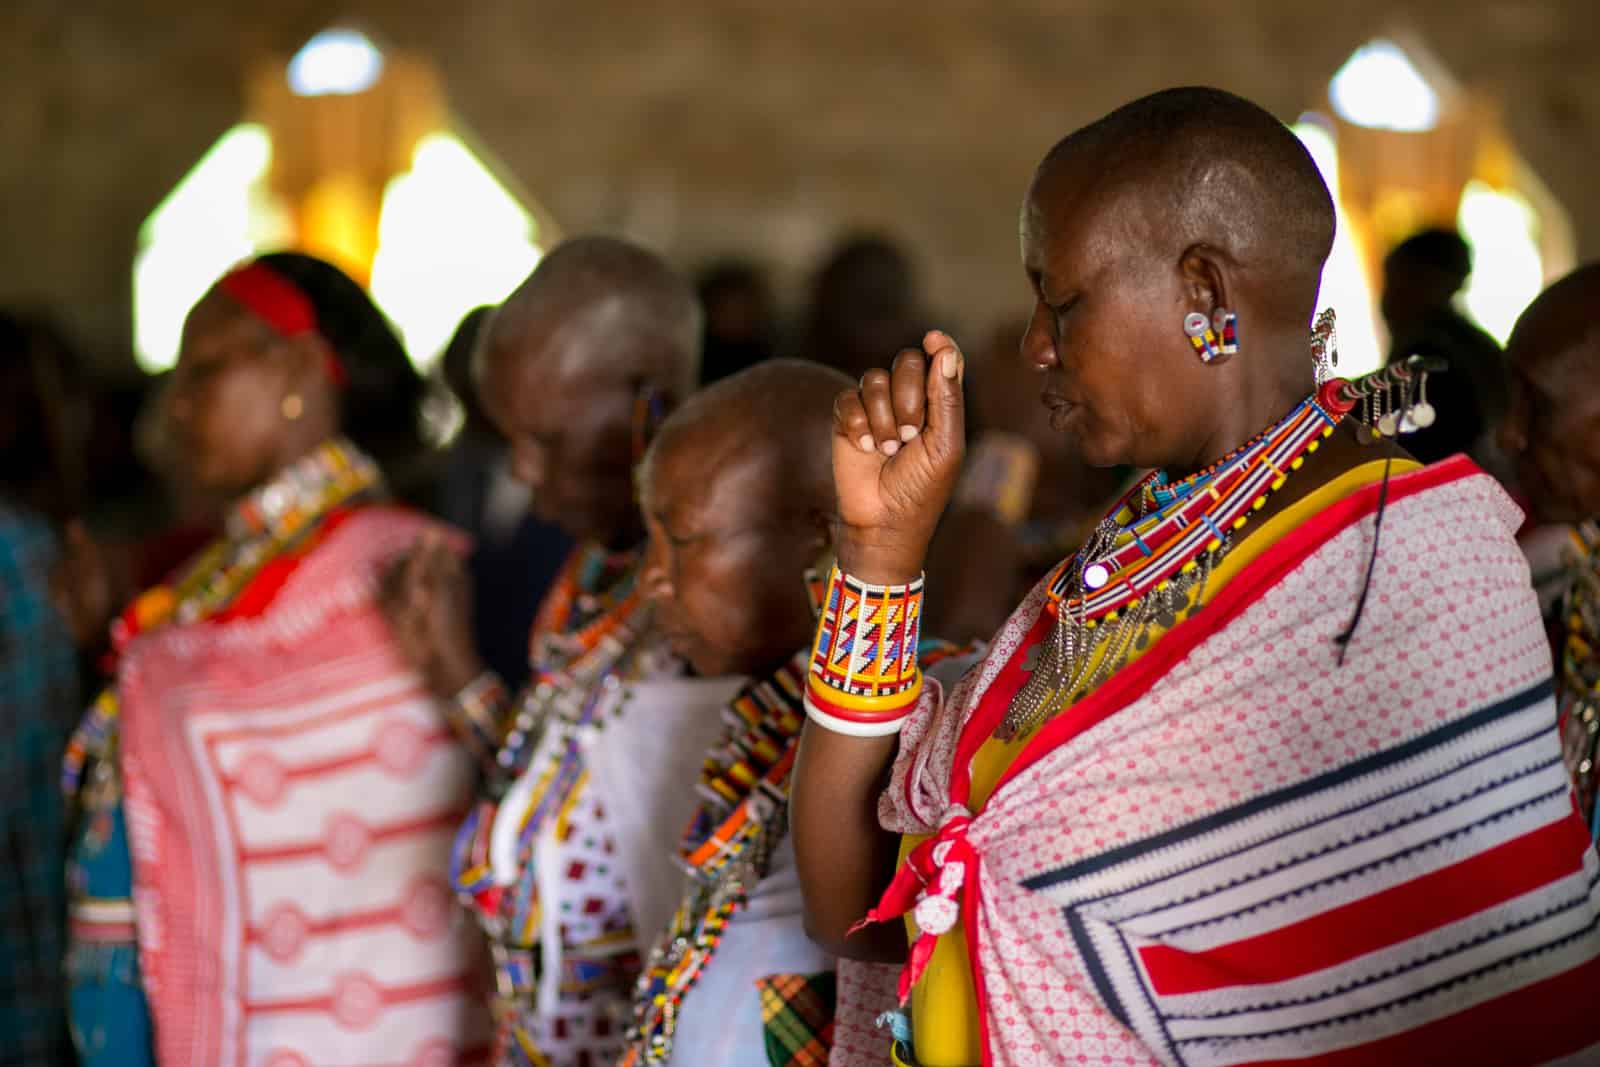 We Belong to Each Other: Stories from Compassion Bloggers in Kenya